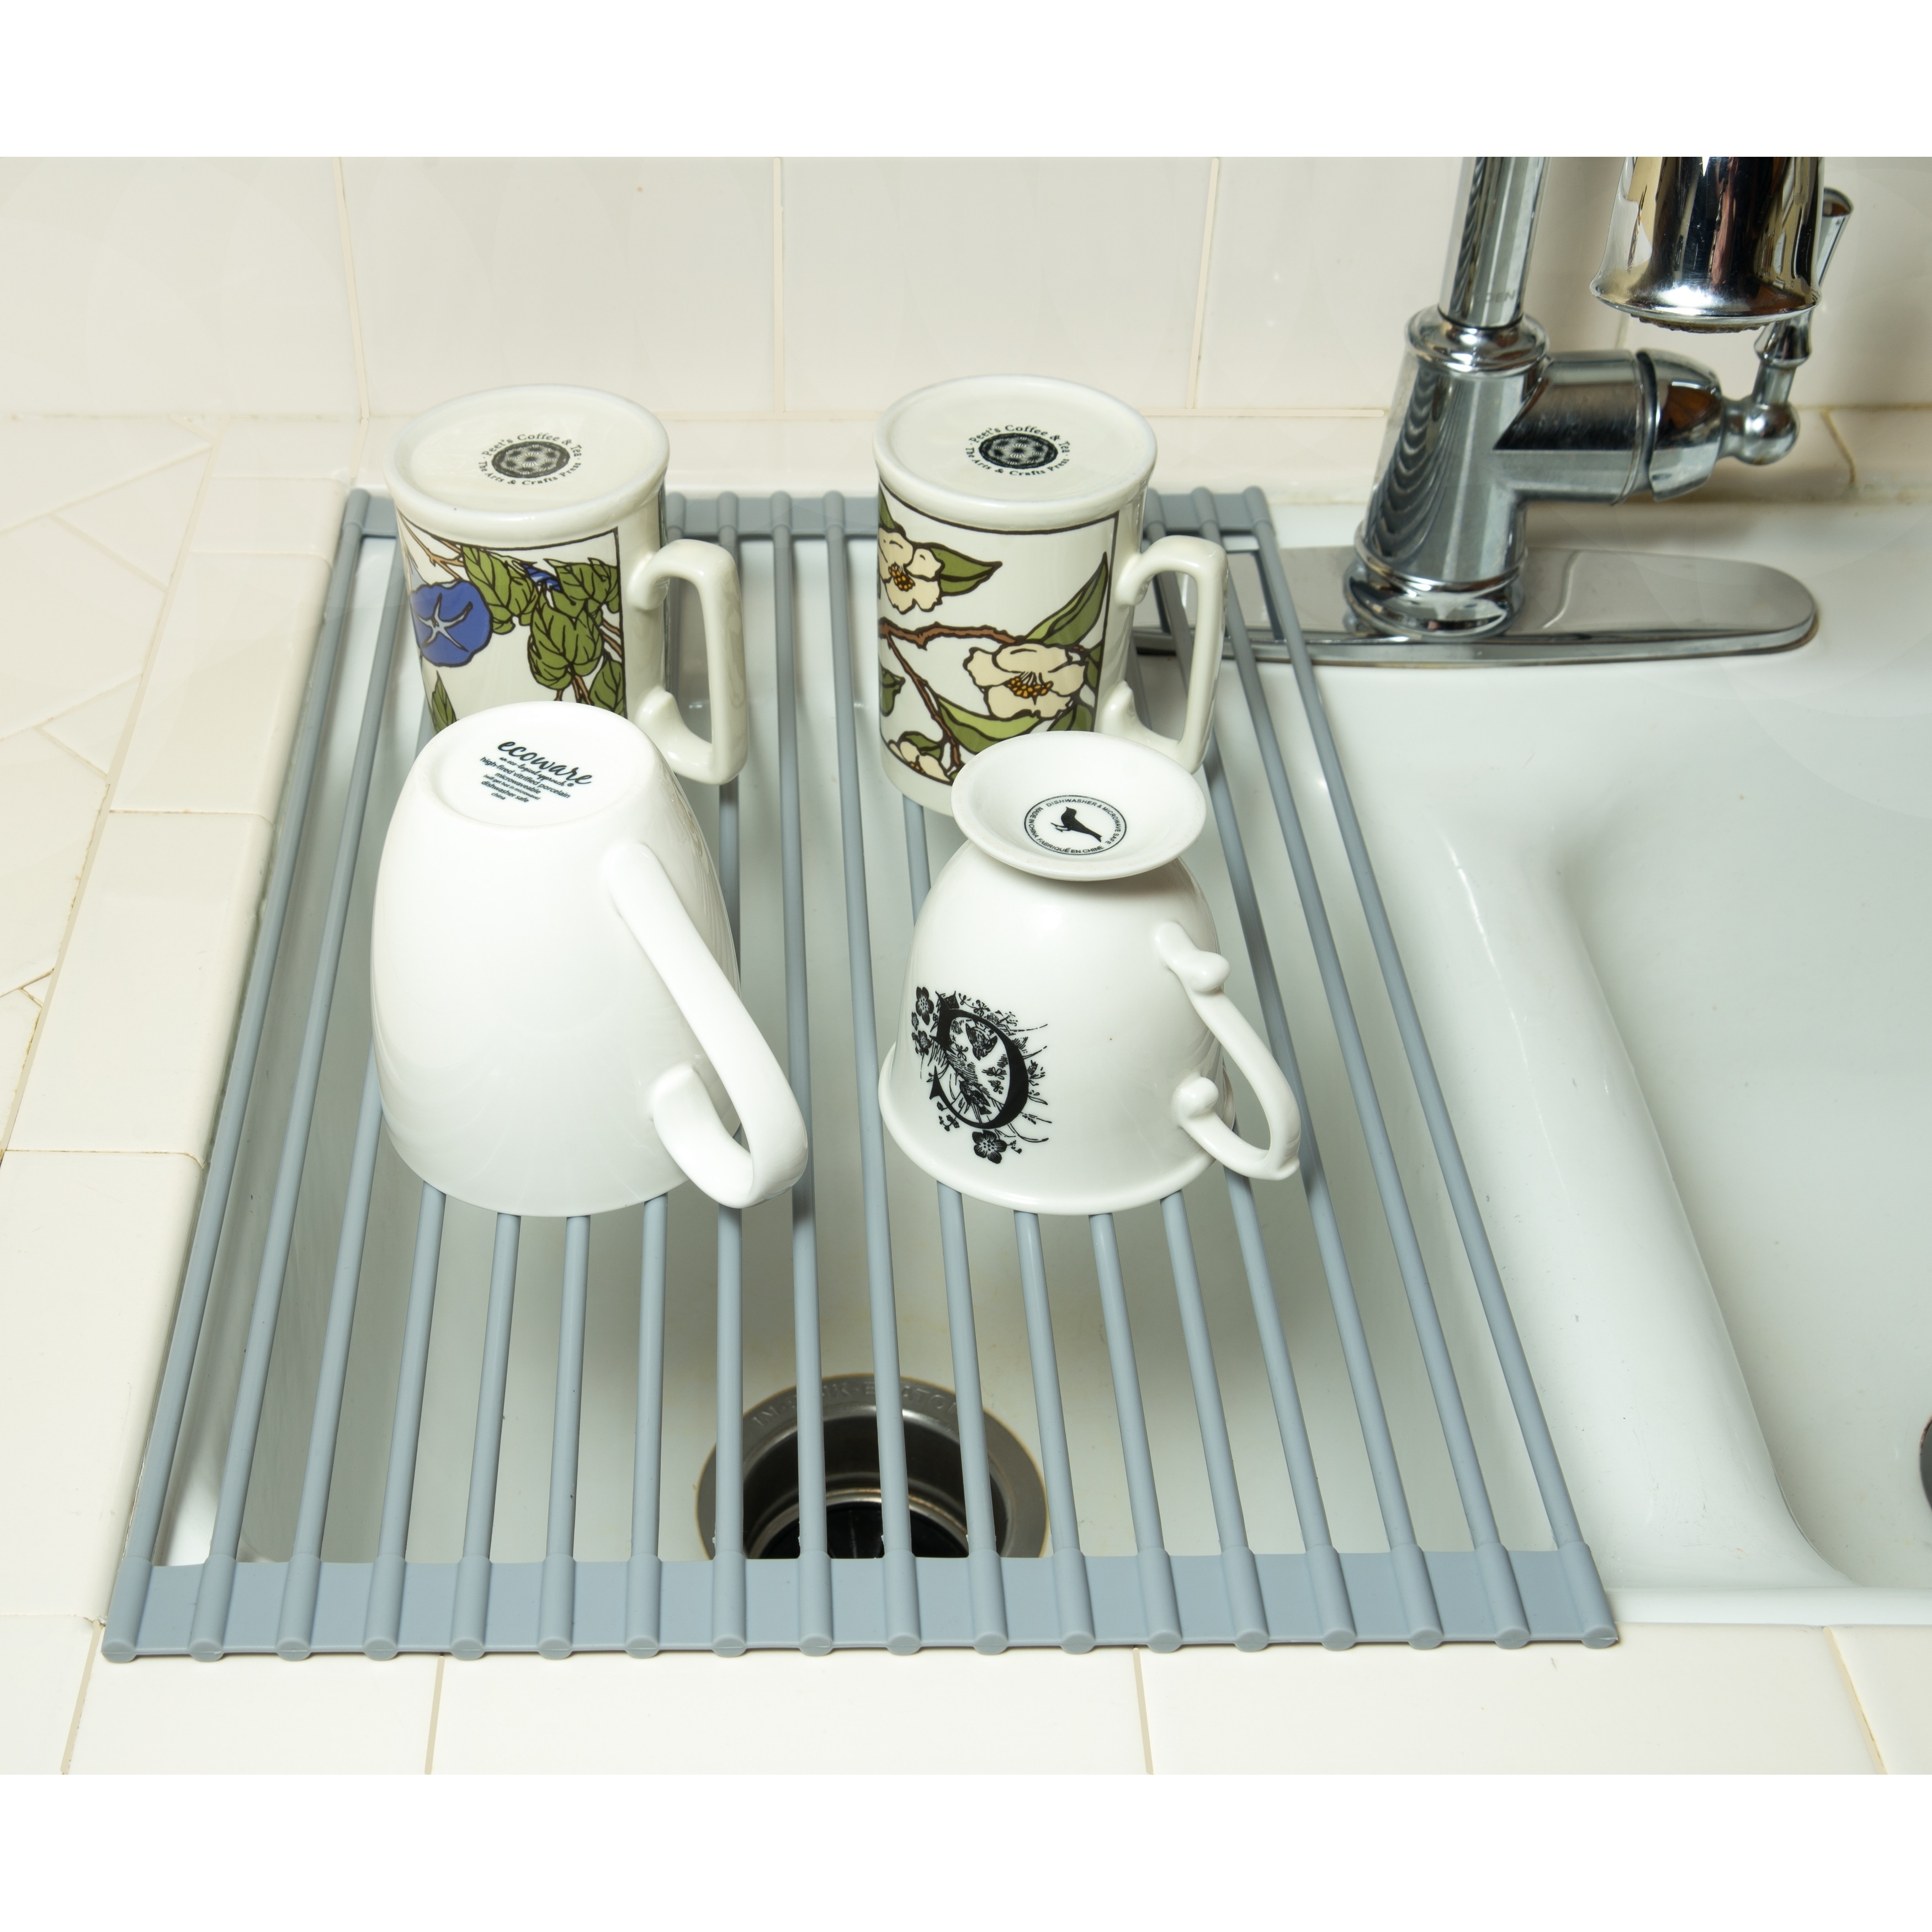 https://ak1.ostkcdn.com/images/products/18104836/20-Dish-Drying-Rack-Roll-Up-Over-the-Sink-by-Trademark-Innovations-6b130b52-978c-461d-a771-caa9fe048bd7.jpg